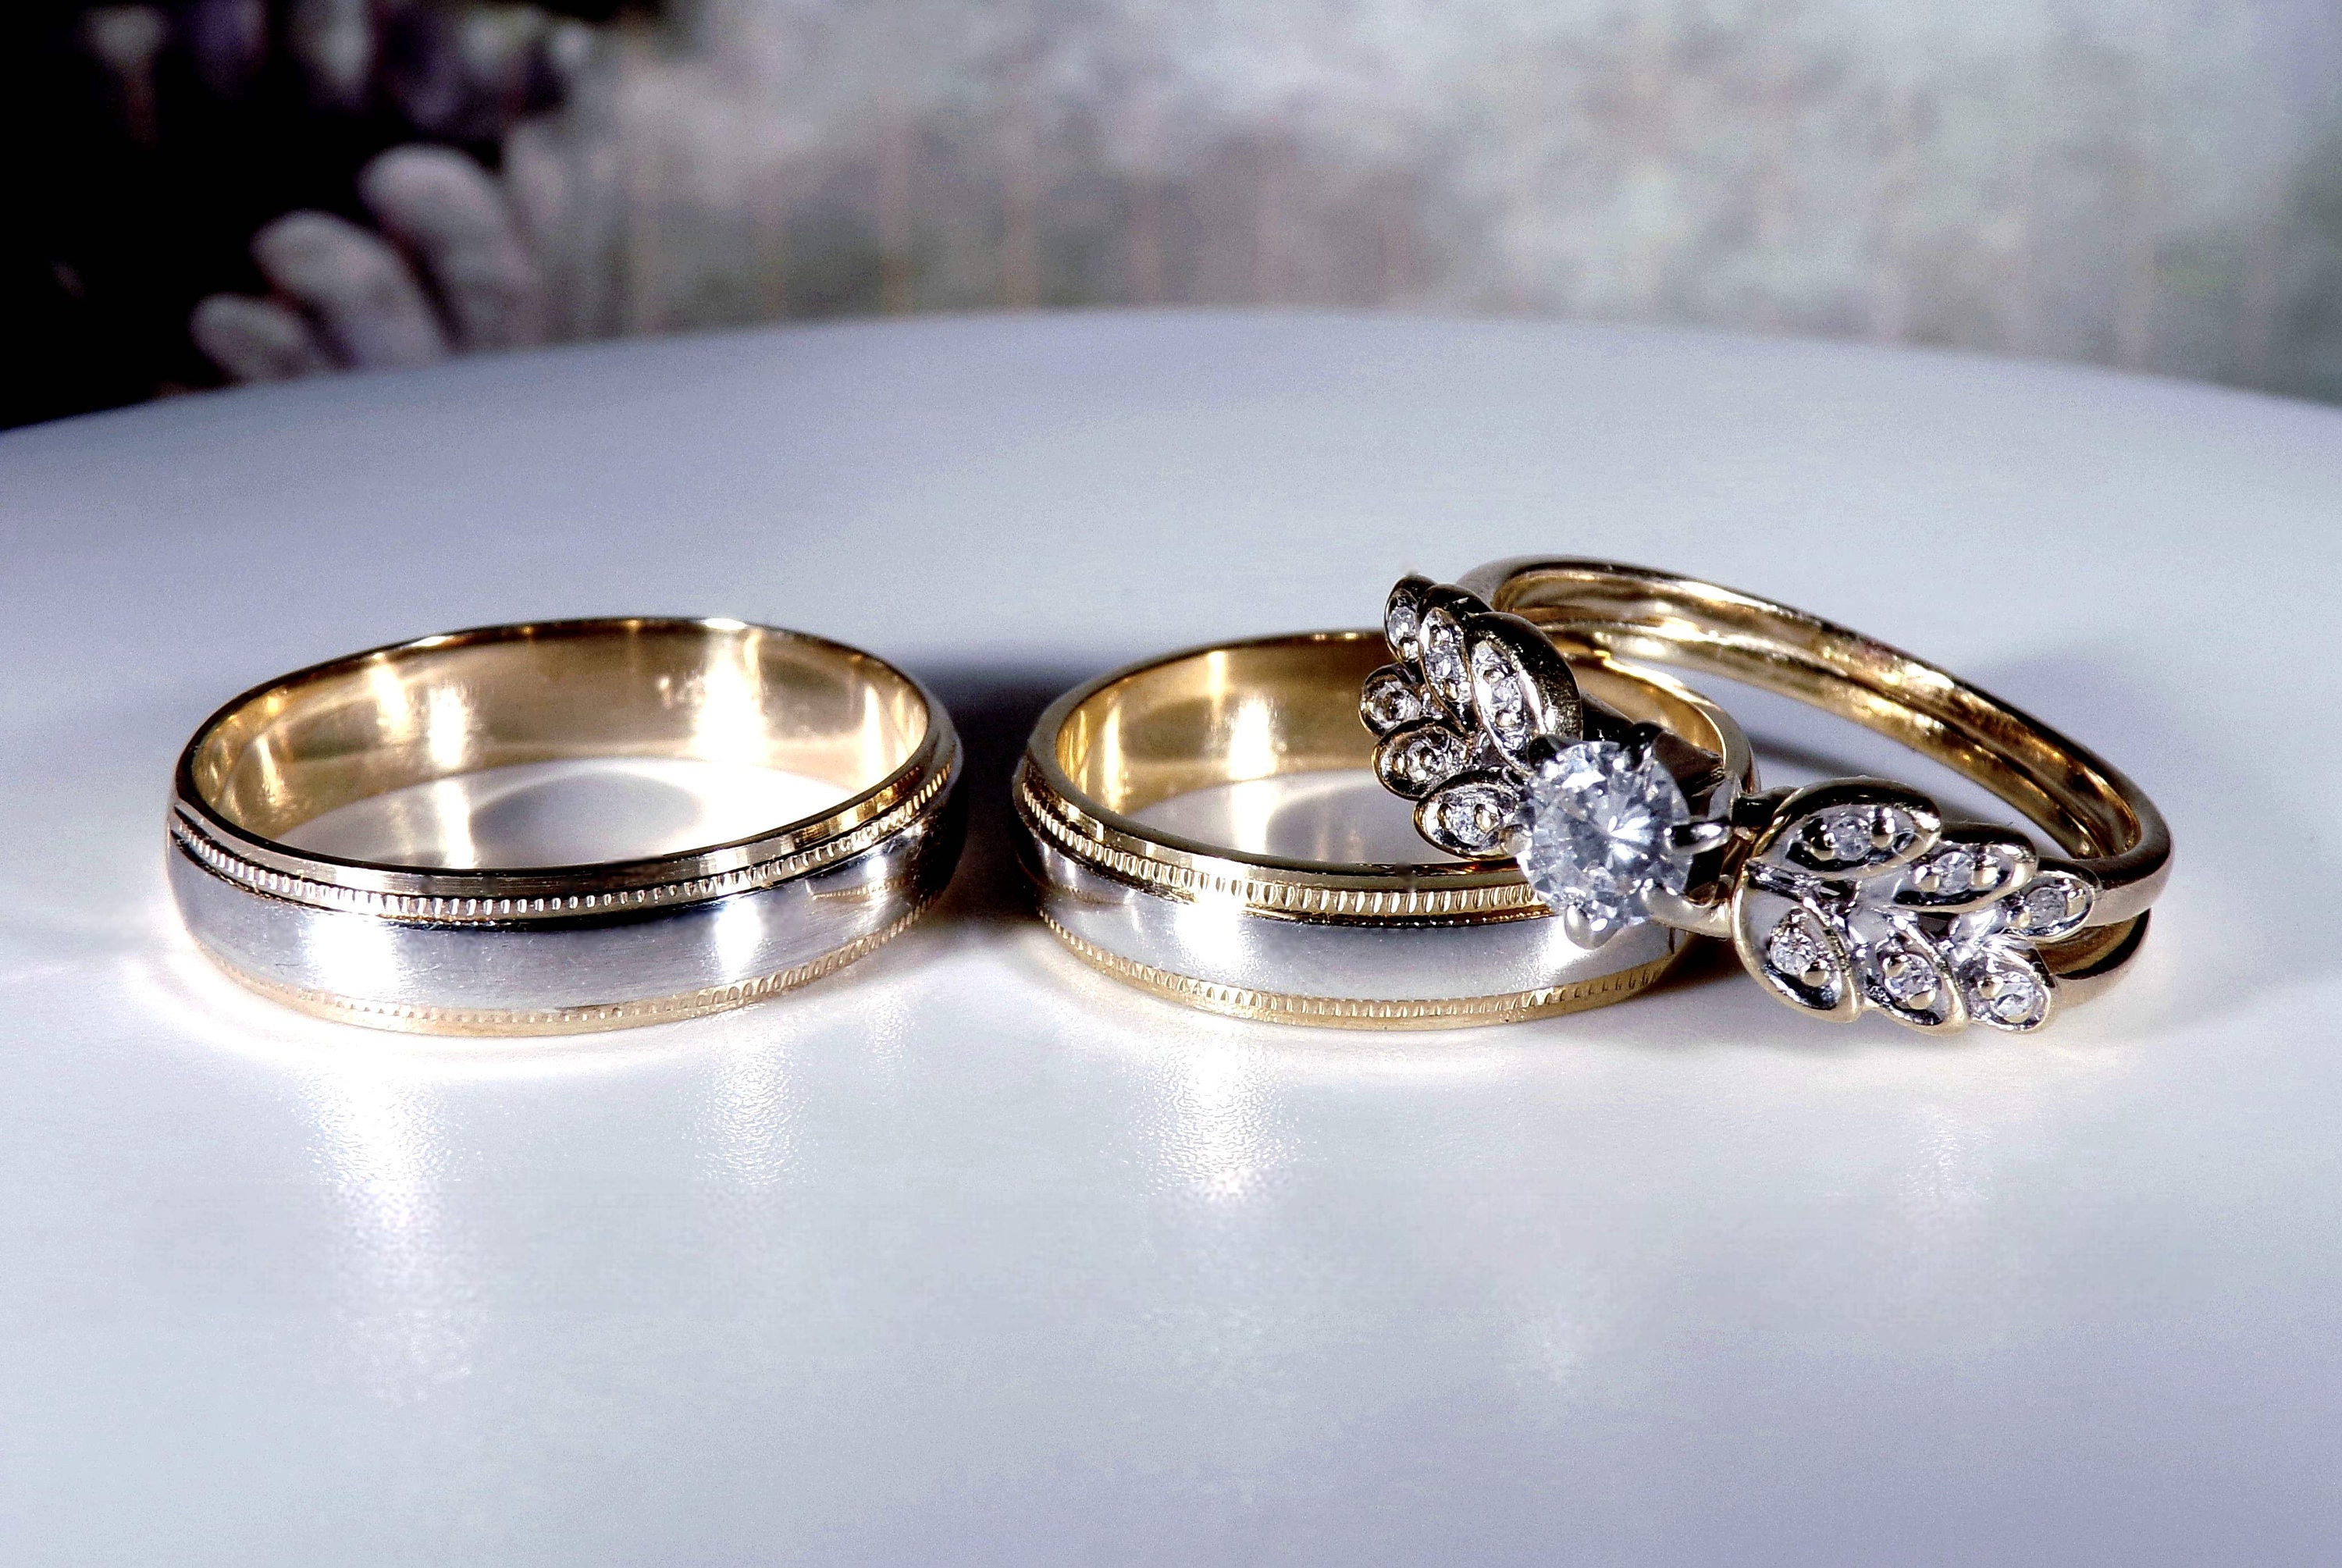 Engagement Rings: Difference Between A Wedding Set And Bridal Set